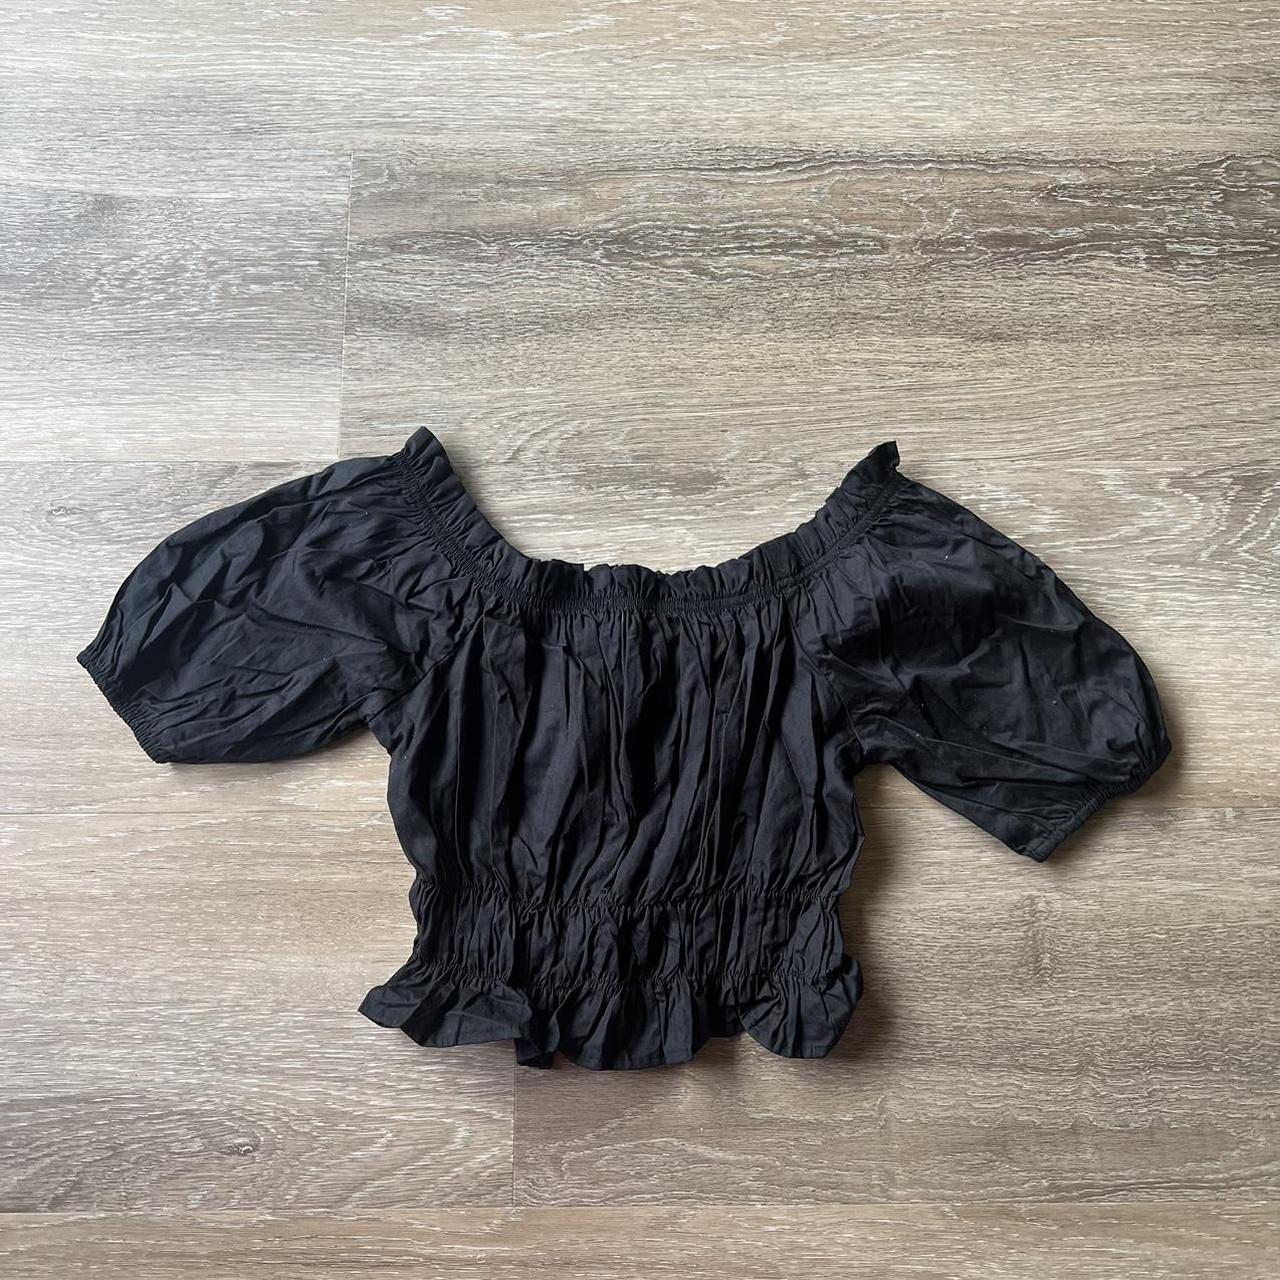 Product Image 1 - BNWT black off the shoulder